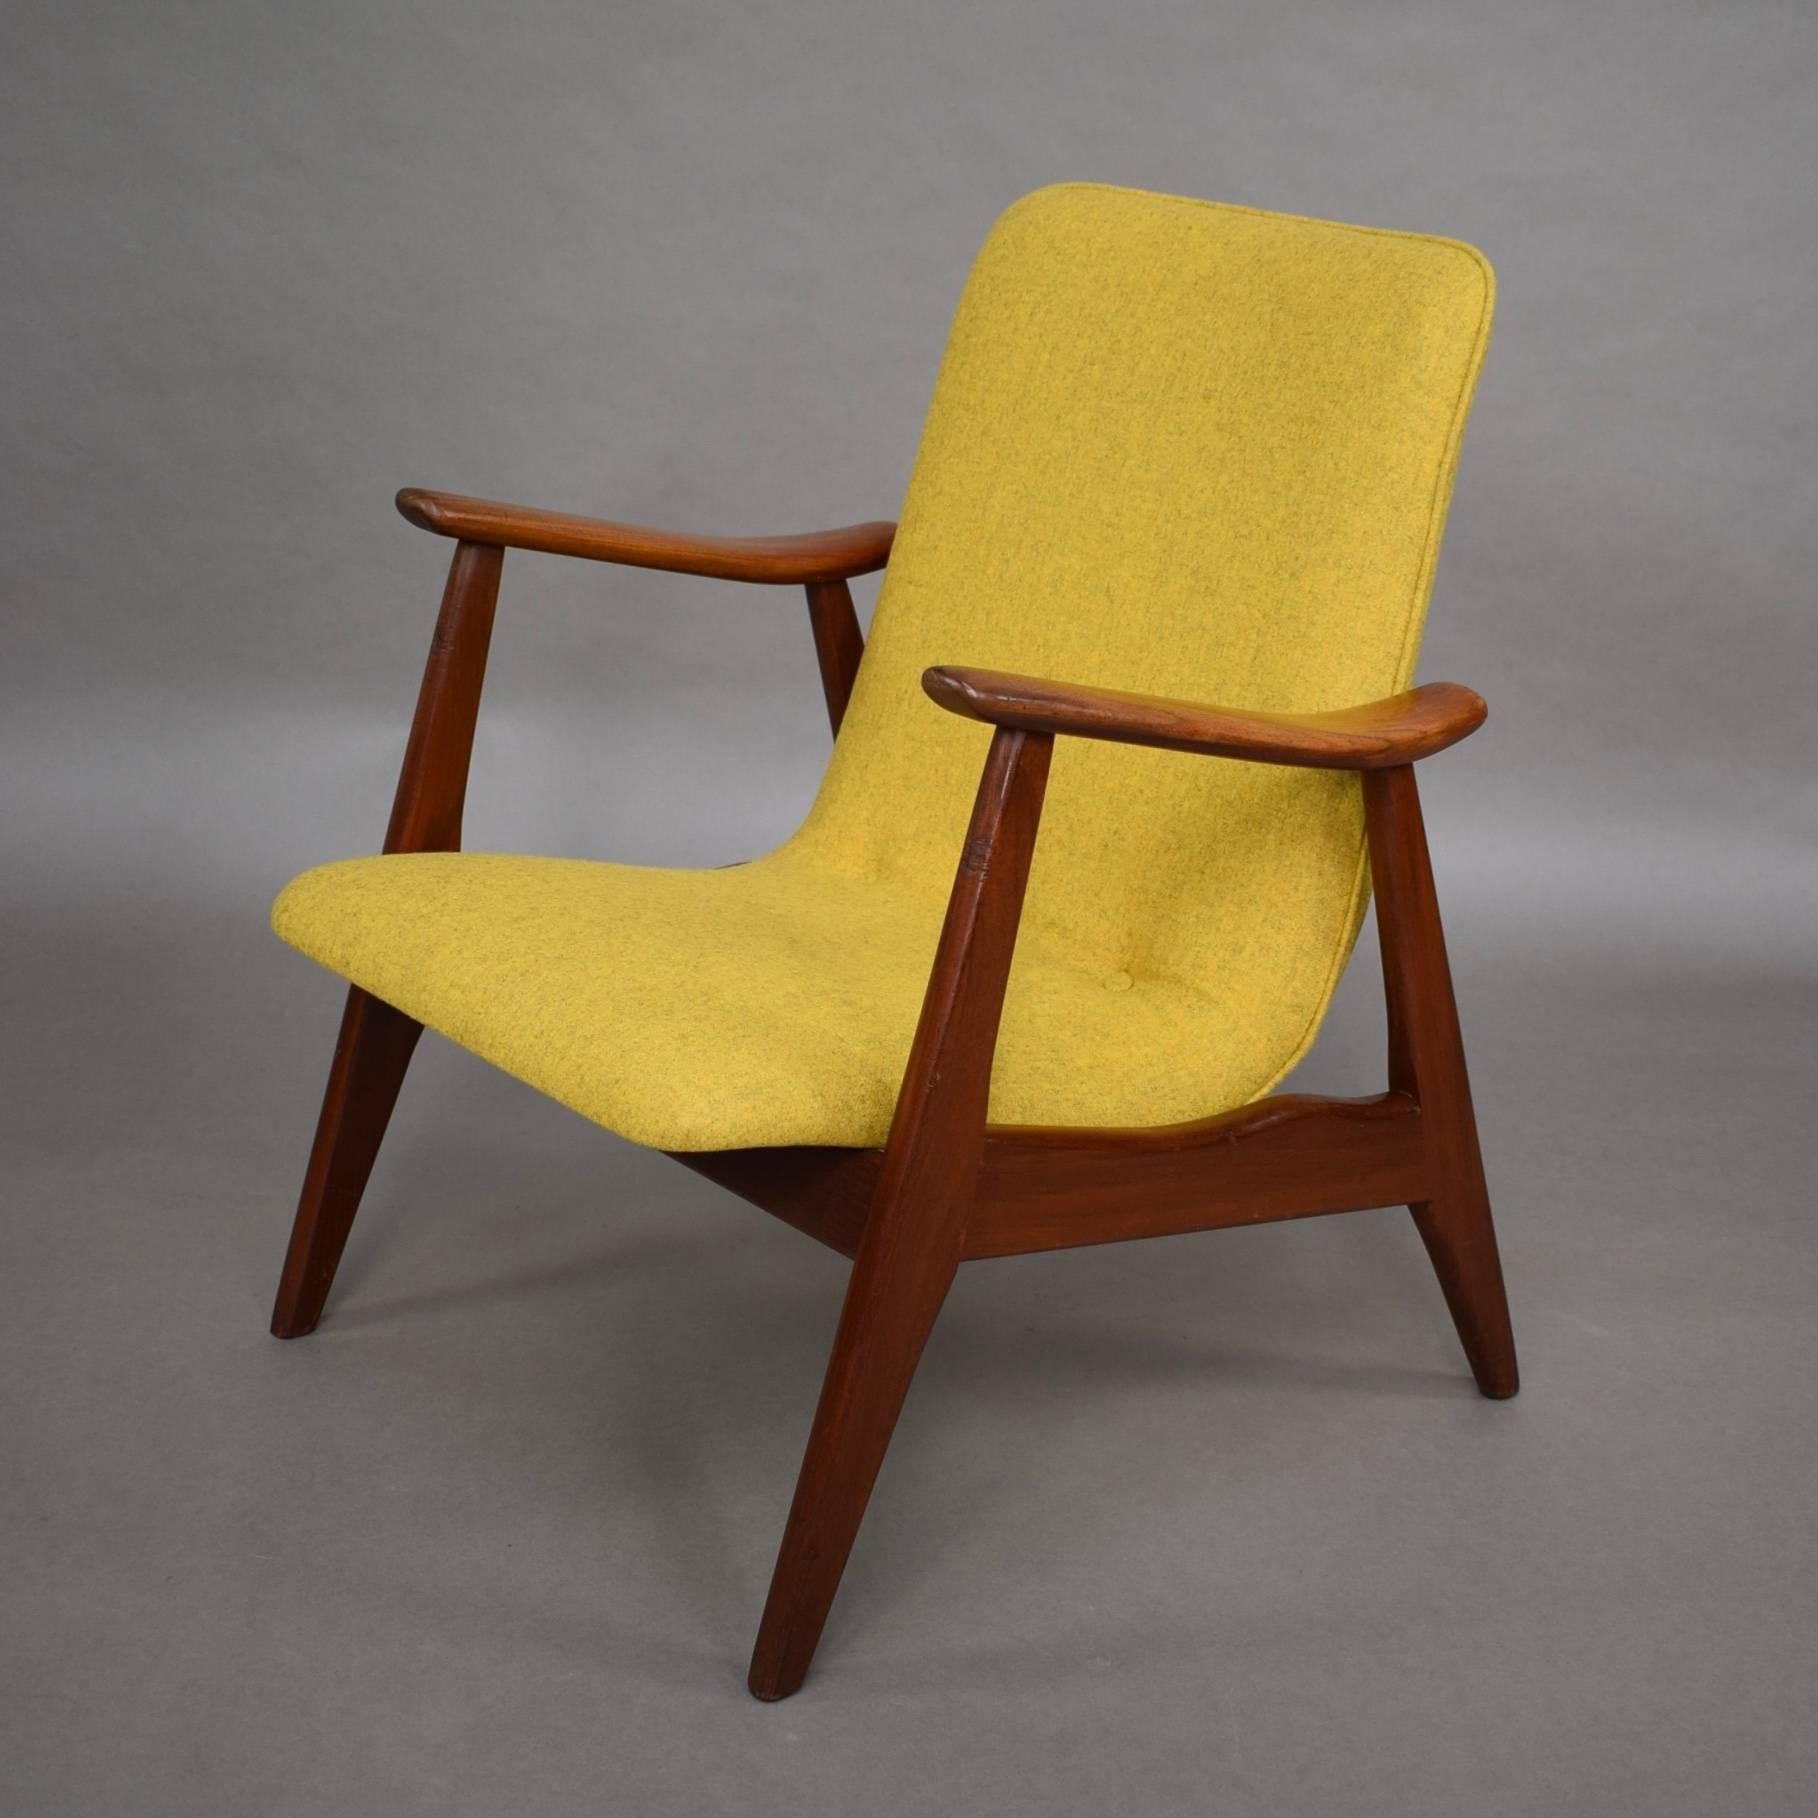 Beautiful pair of Dutch design lounge chair by Louis van Teeffelen, 1960s. The chairs are made of solid teak and are reupholstered with a beautiful trendy felt fabric.
We have multiple chairs available (in different colors).
It is also possible to